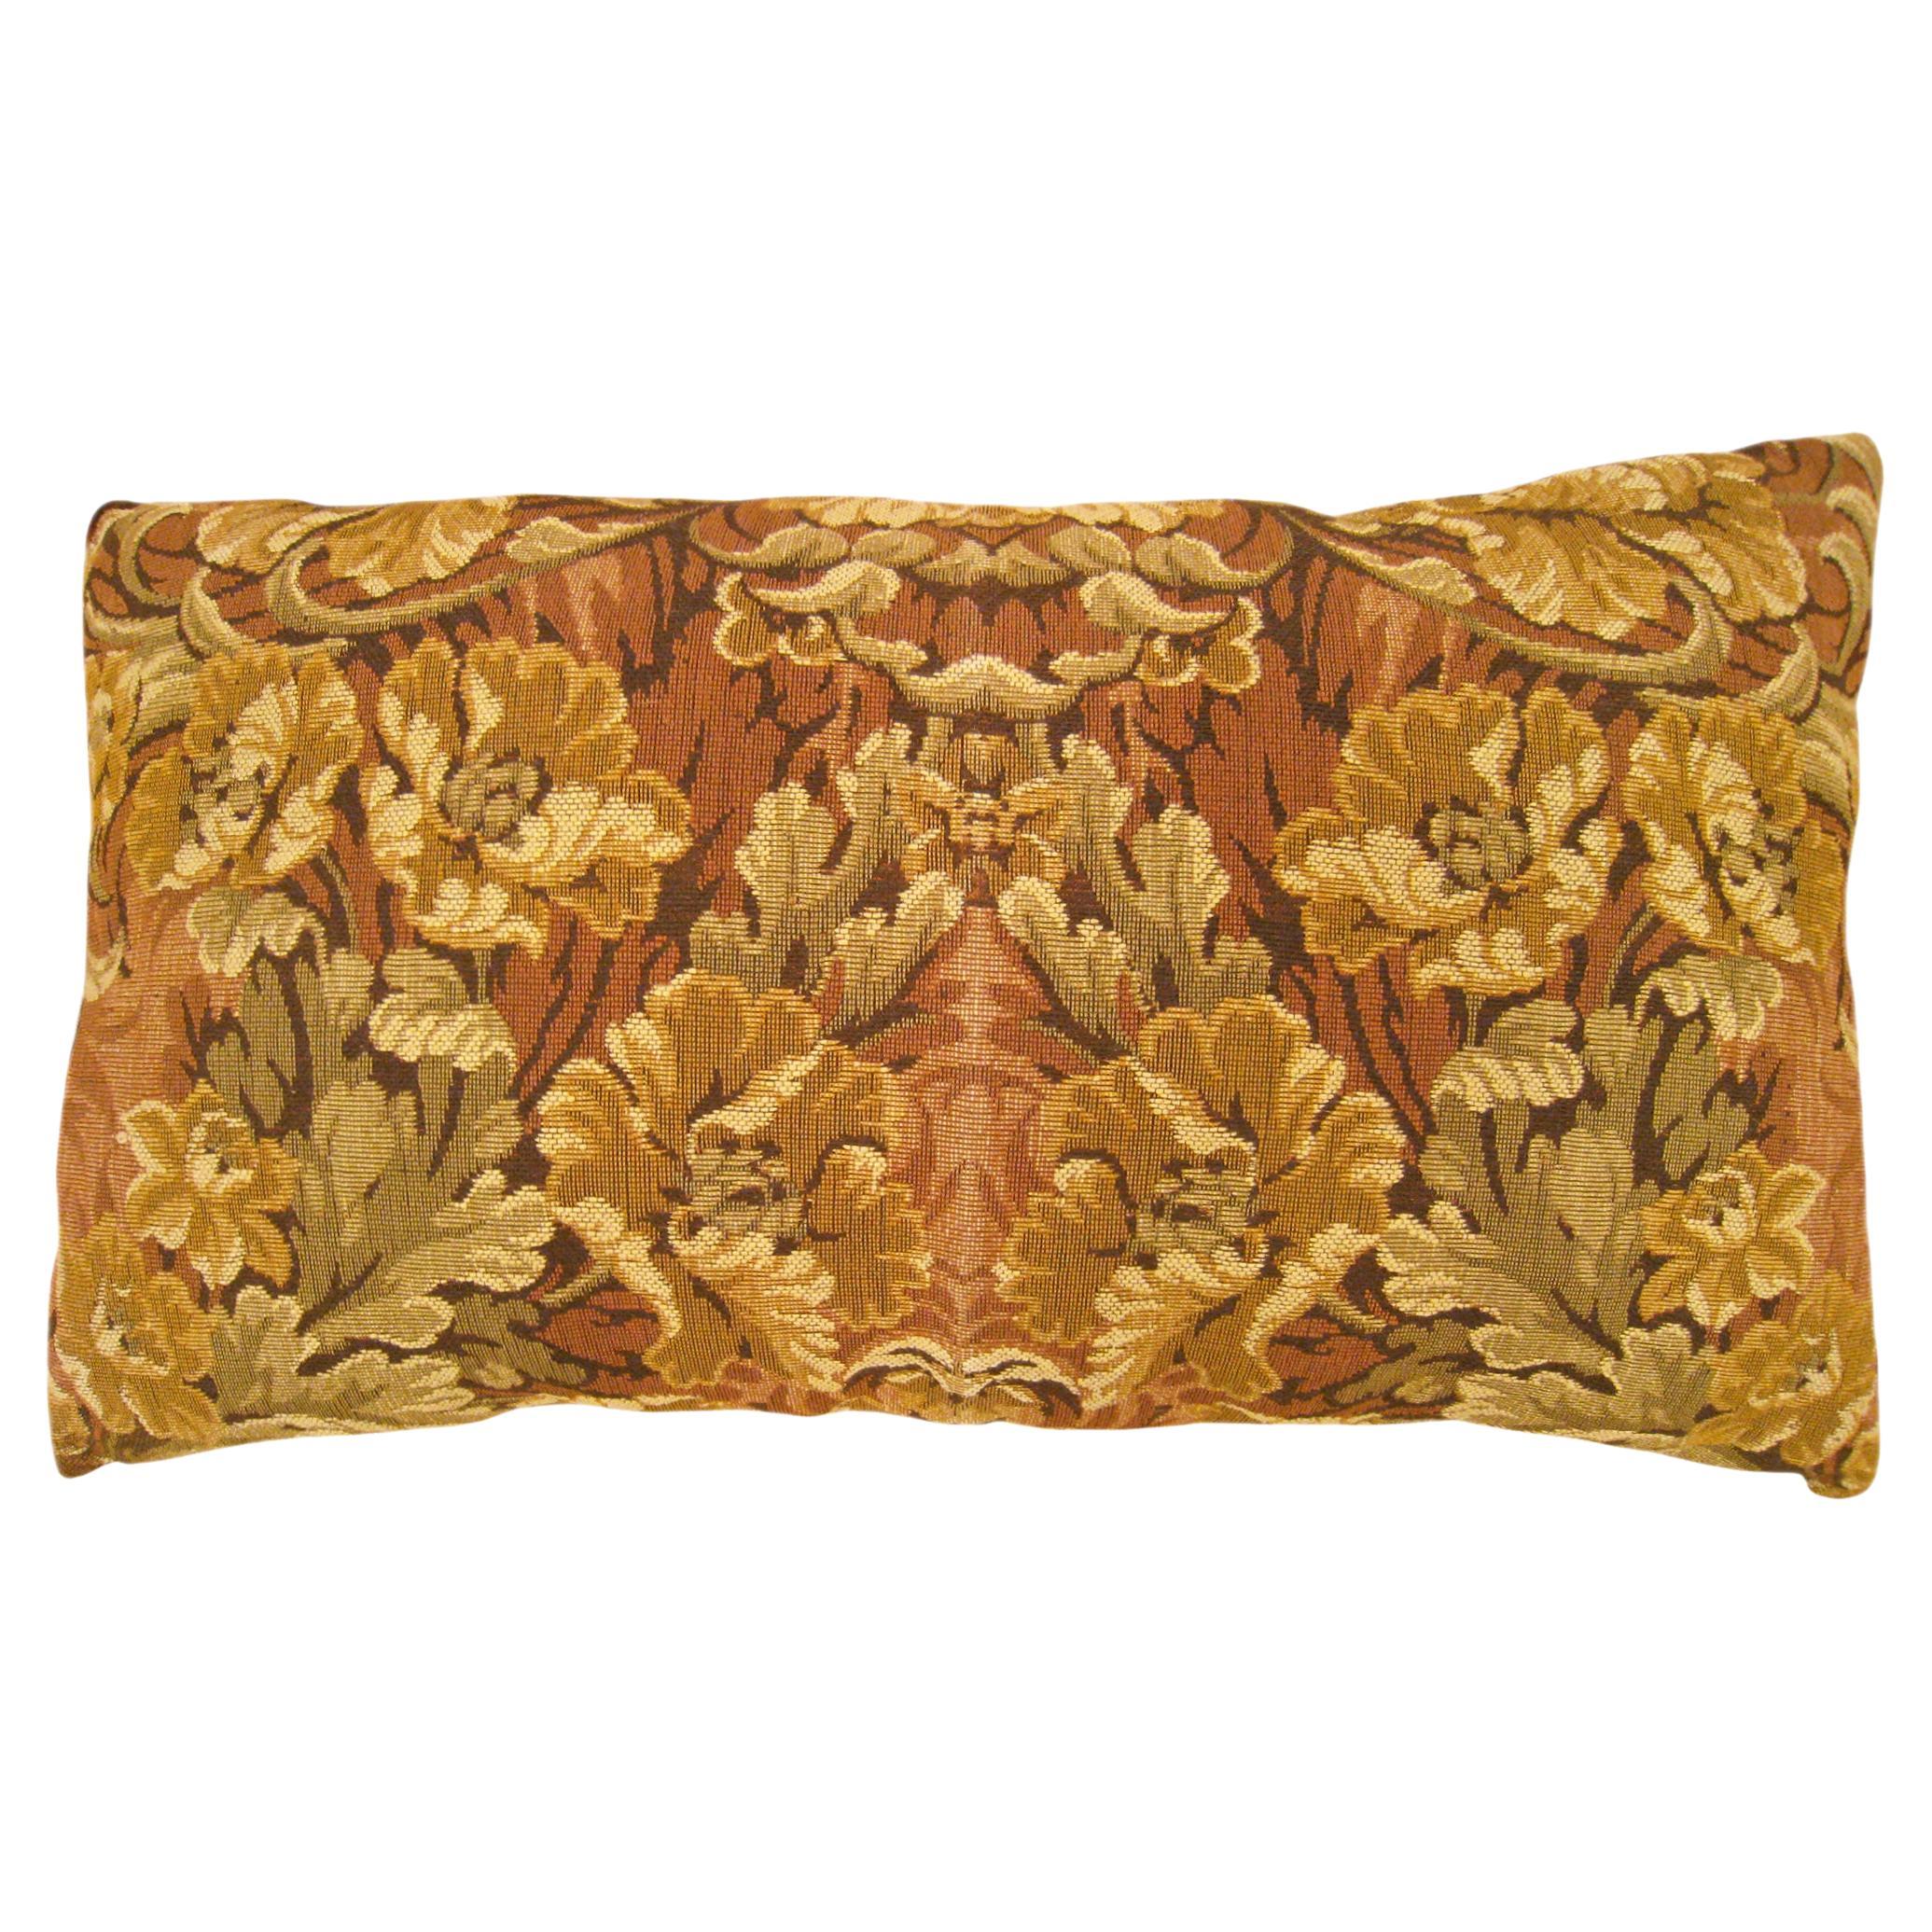 Decorative Antique Jacquard Tapestry Pillow with Floral Elements 